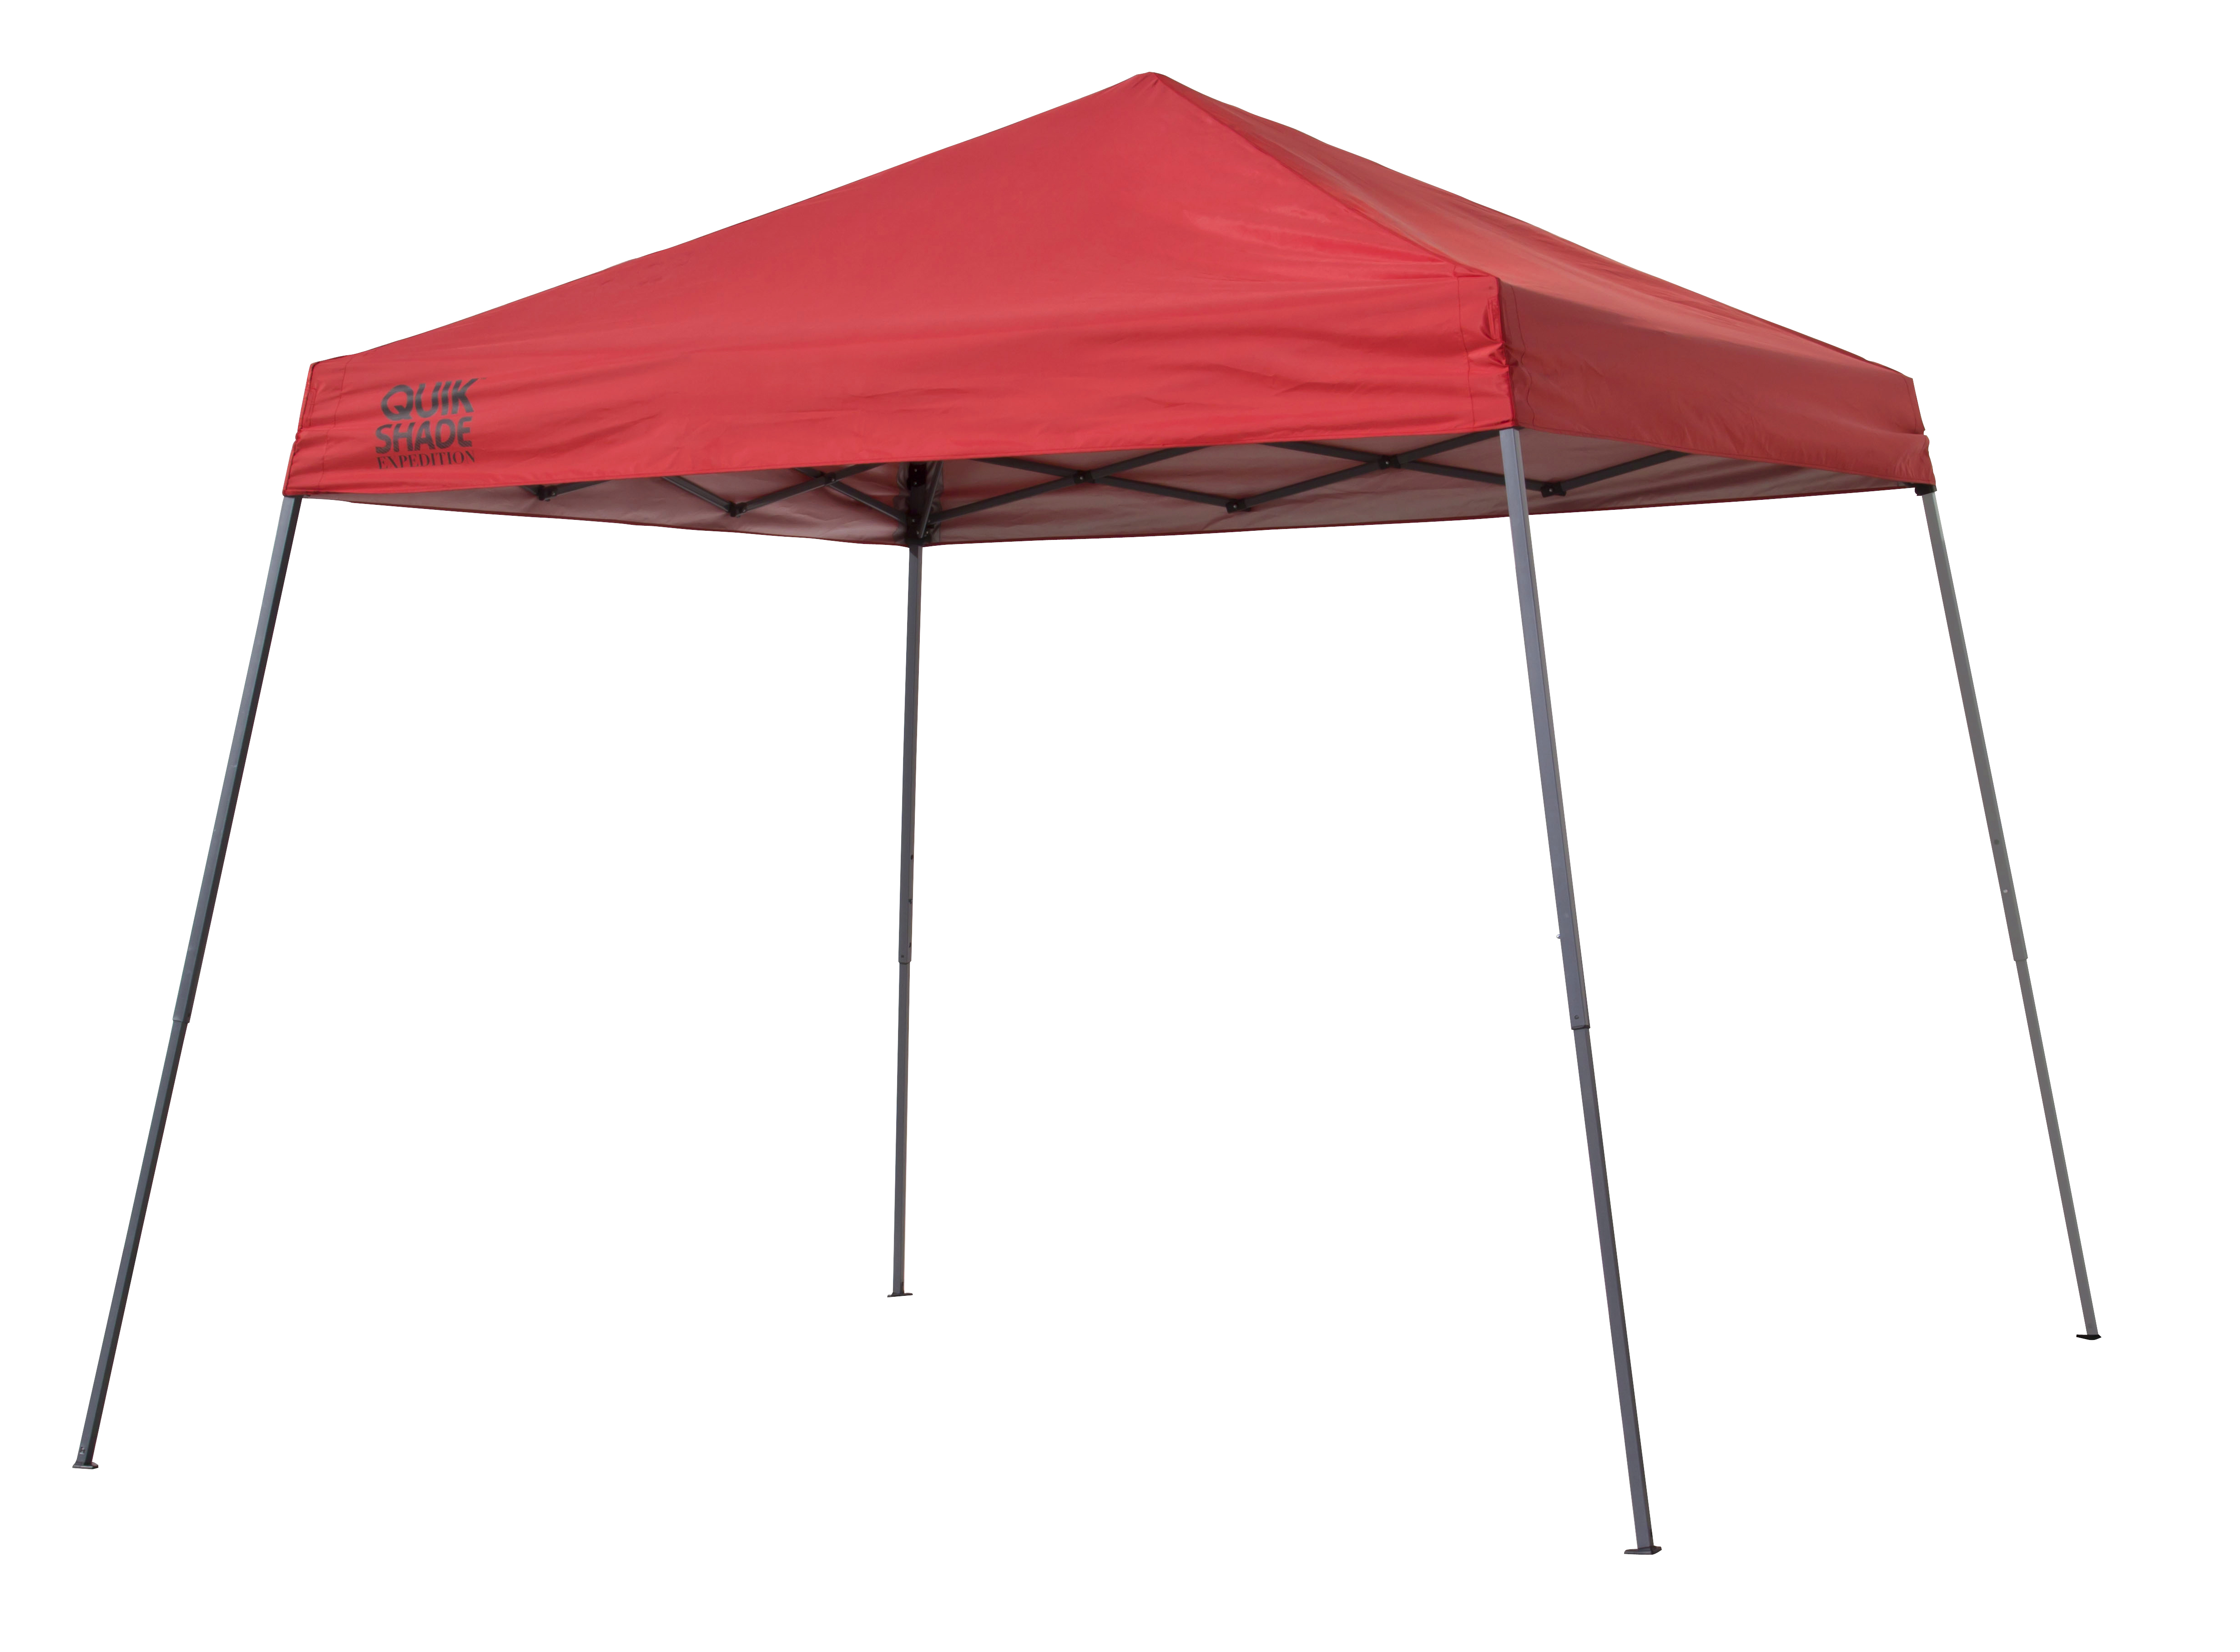 0085955095776 - QUIK SHADE EXPEDITION 64 TEAM COLORS INSTANT CANOPY - RED